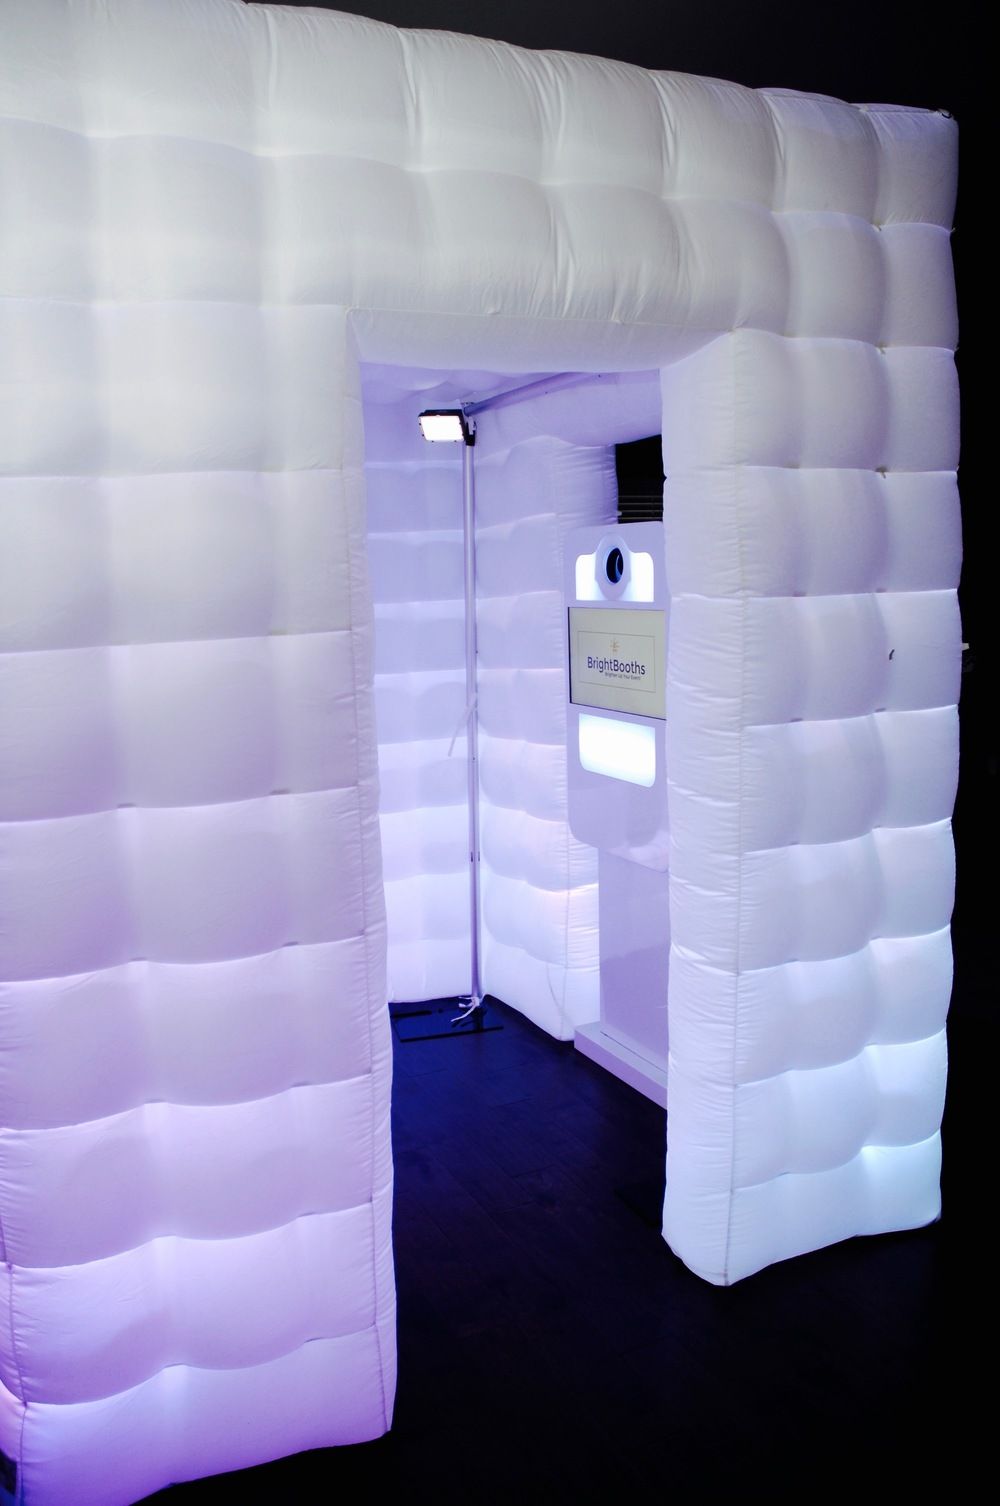 Inflatable Photobooth lighted up with instant photoshoot camera igloo at event wedding booth